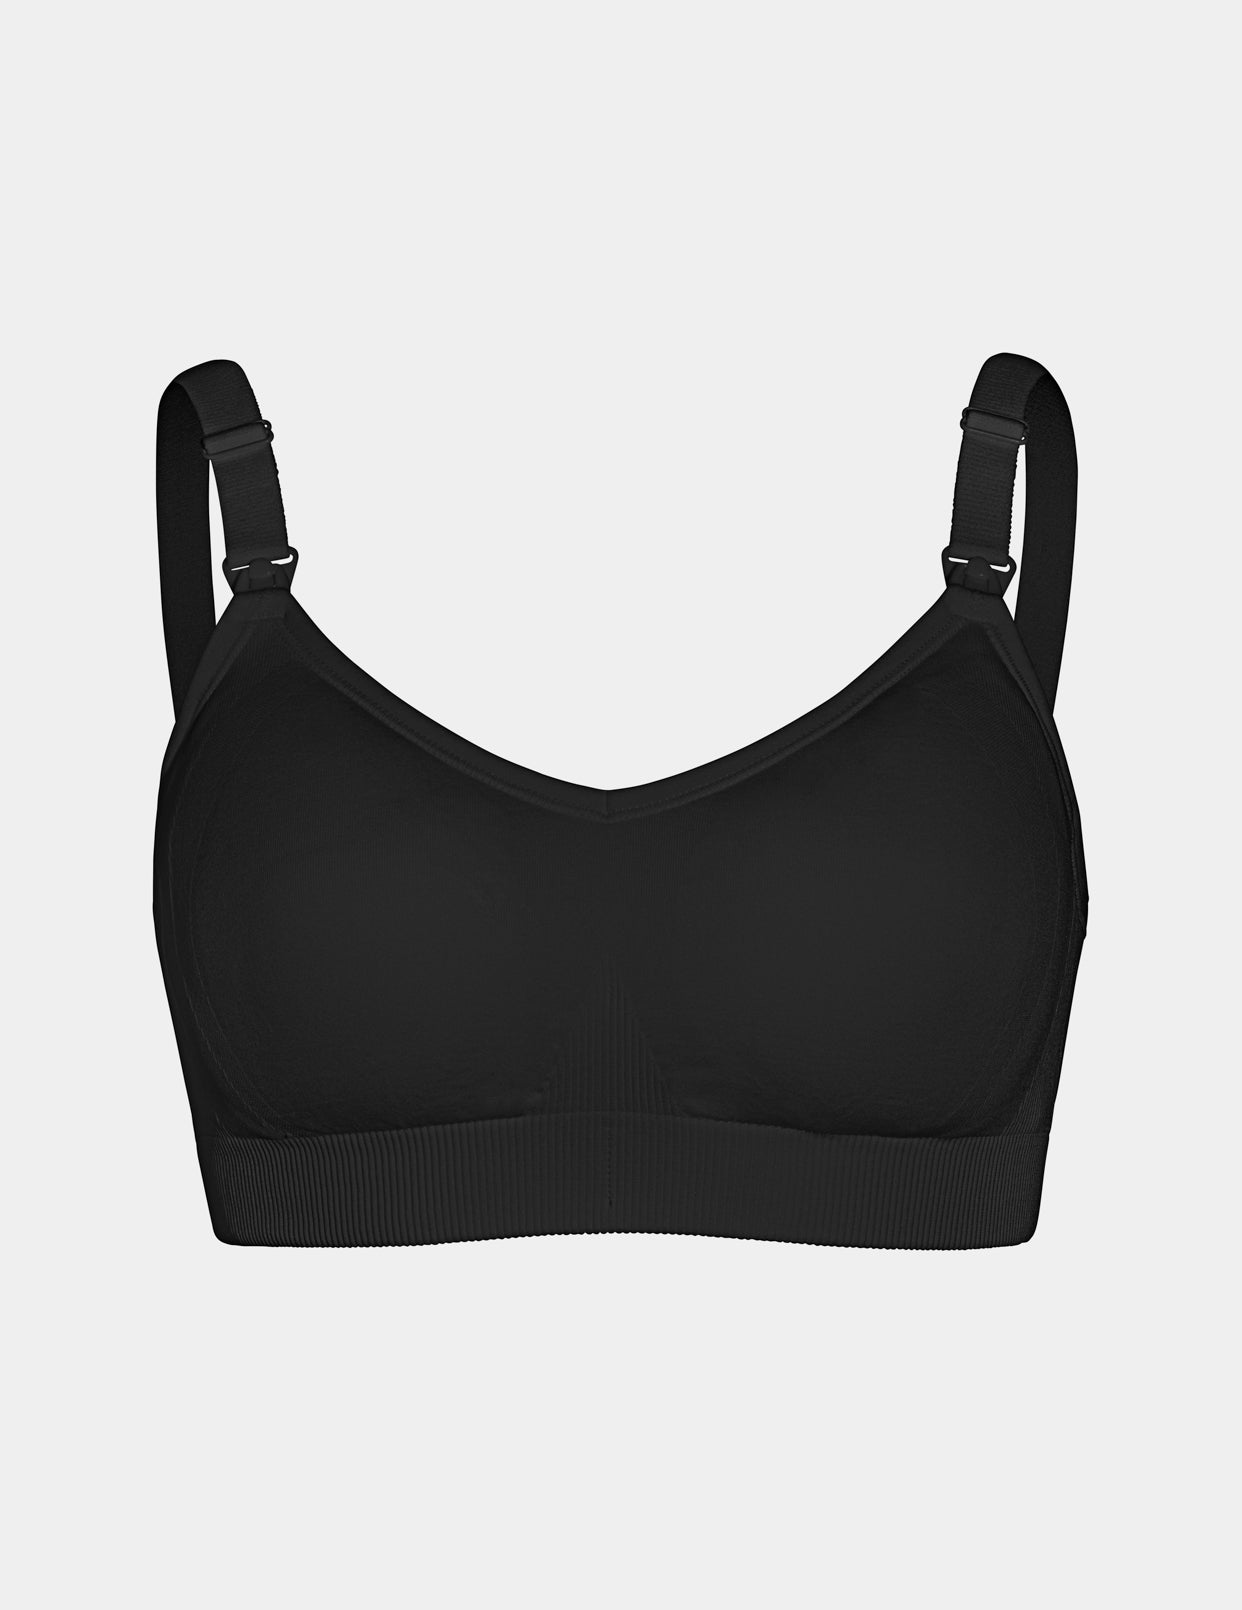 The Ultimate Guide to Maternity Bras: When To Make the Switch